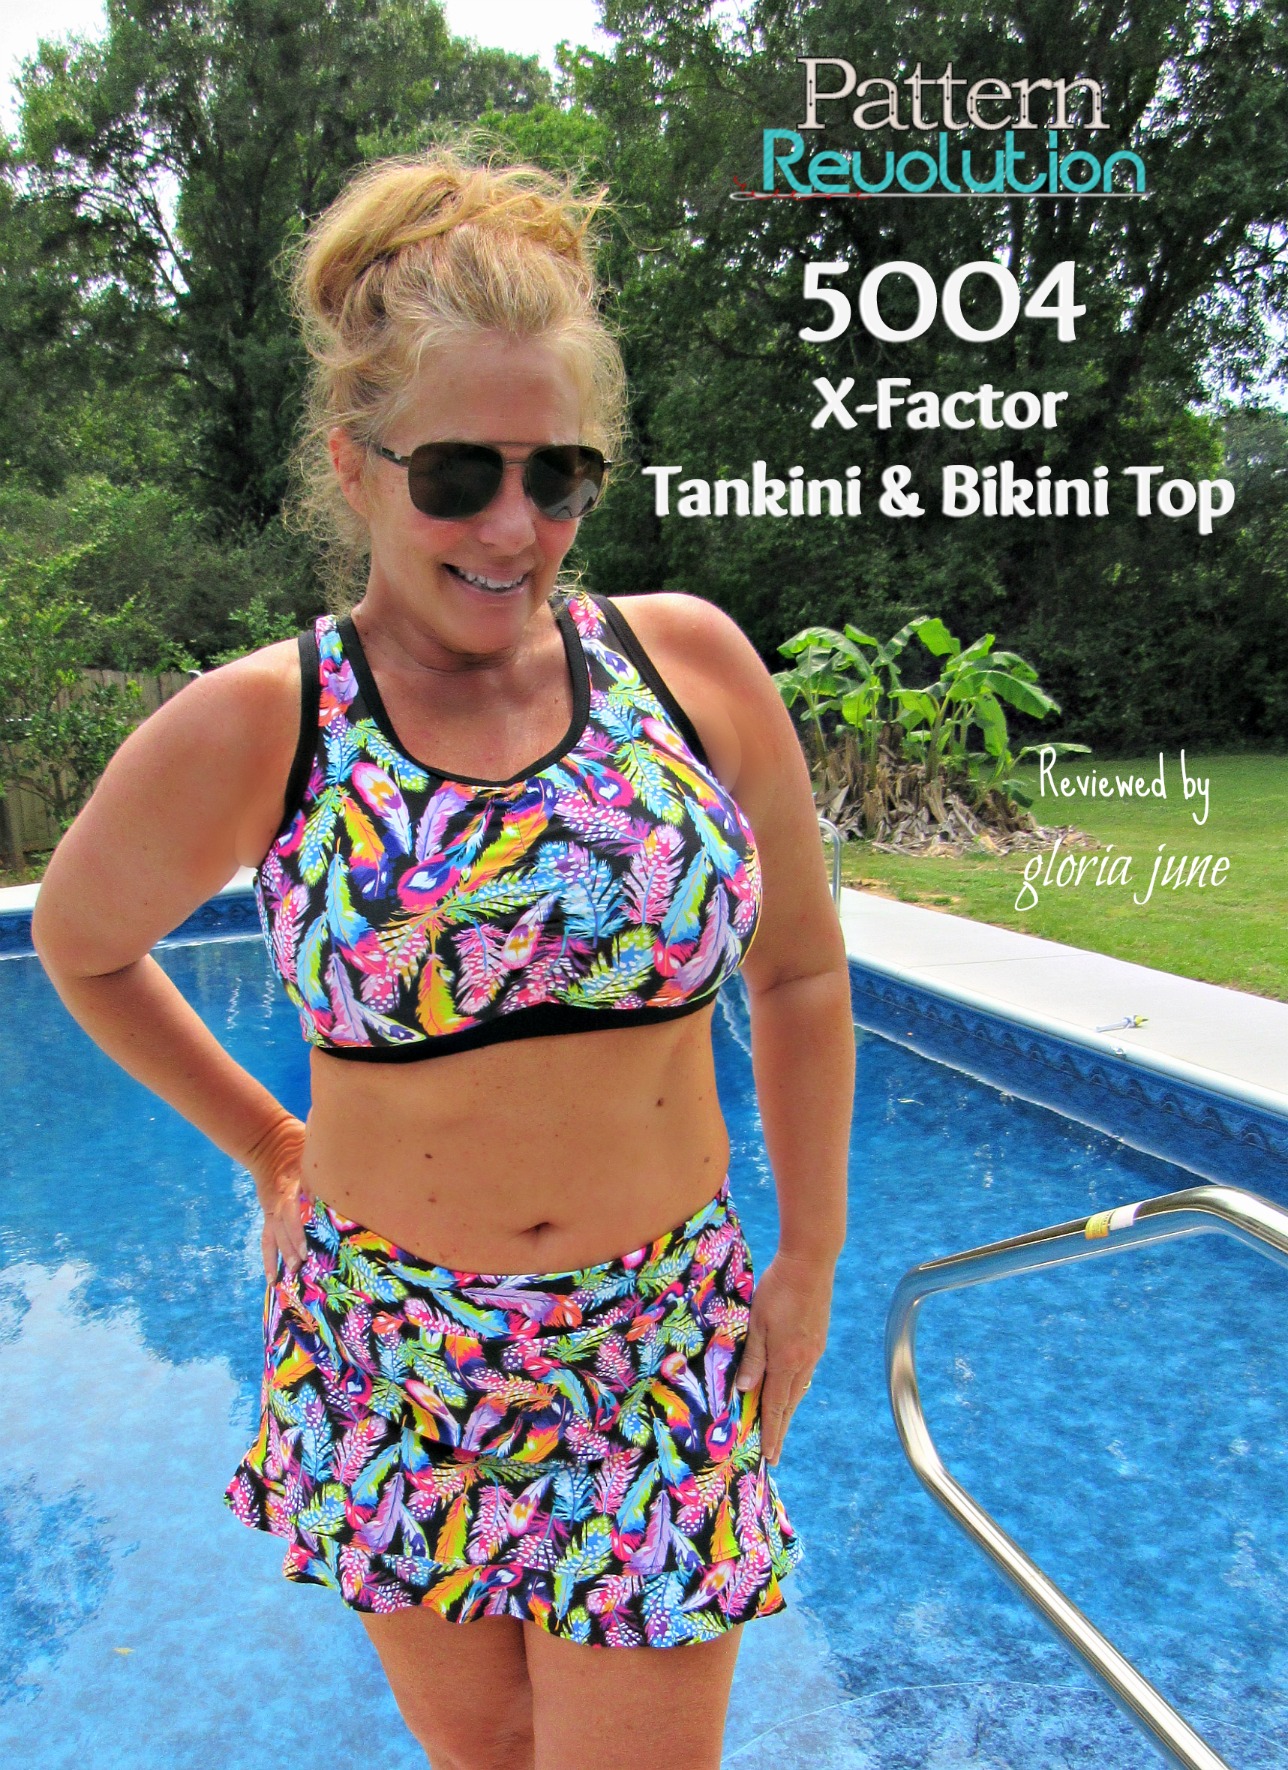 X-Factor Tankini and Bikini Top by 5 Out Of 4 Patterns — Pattern Revolution